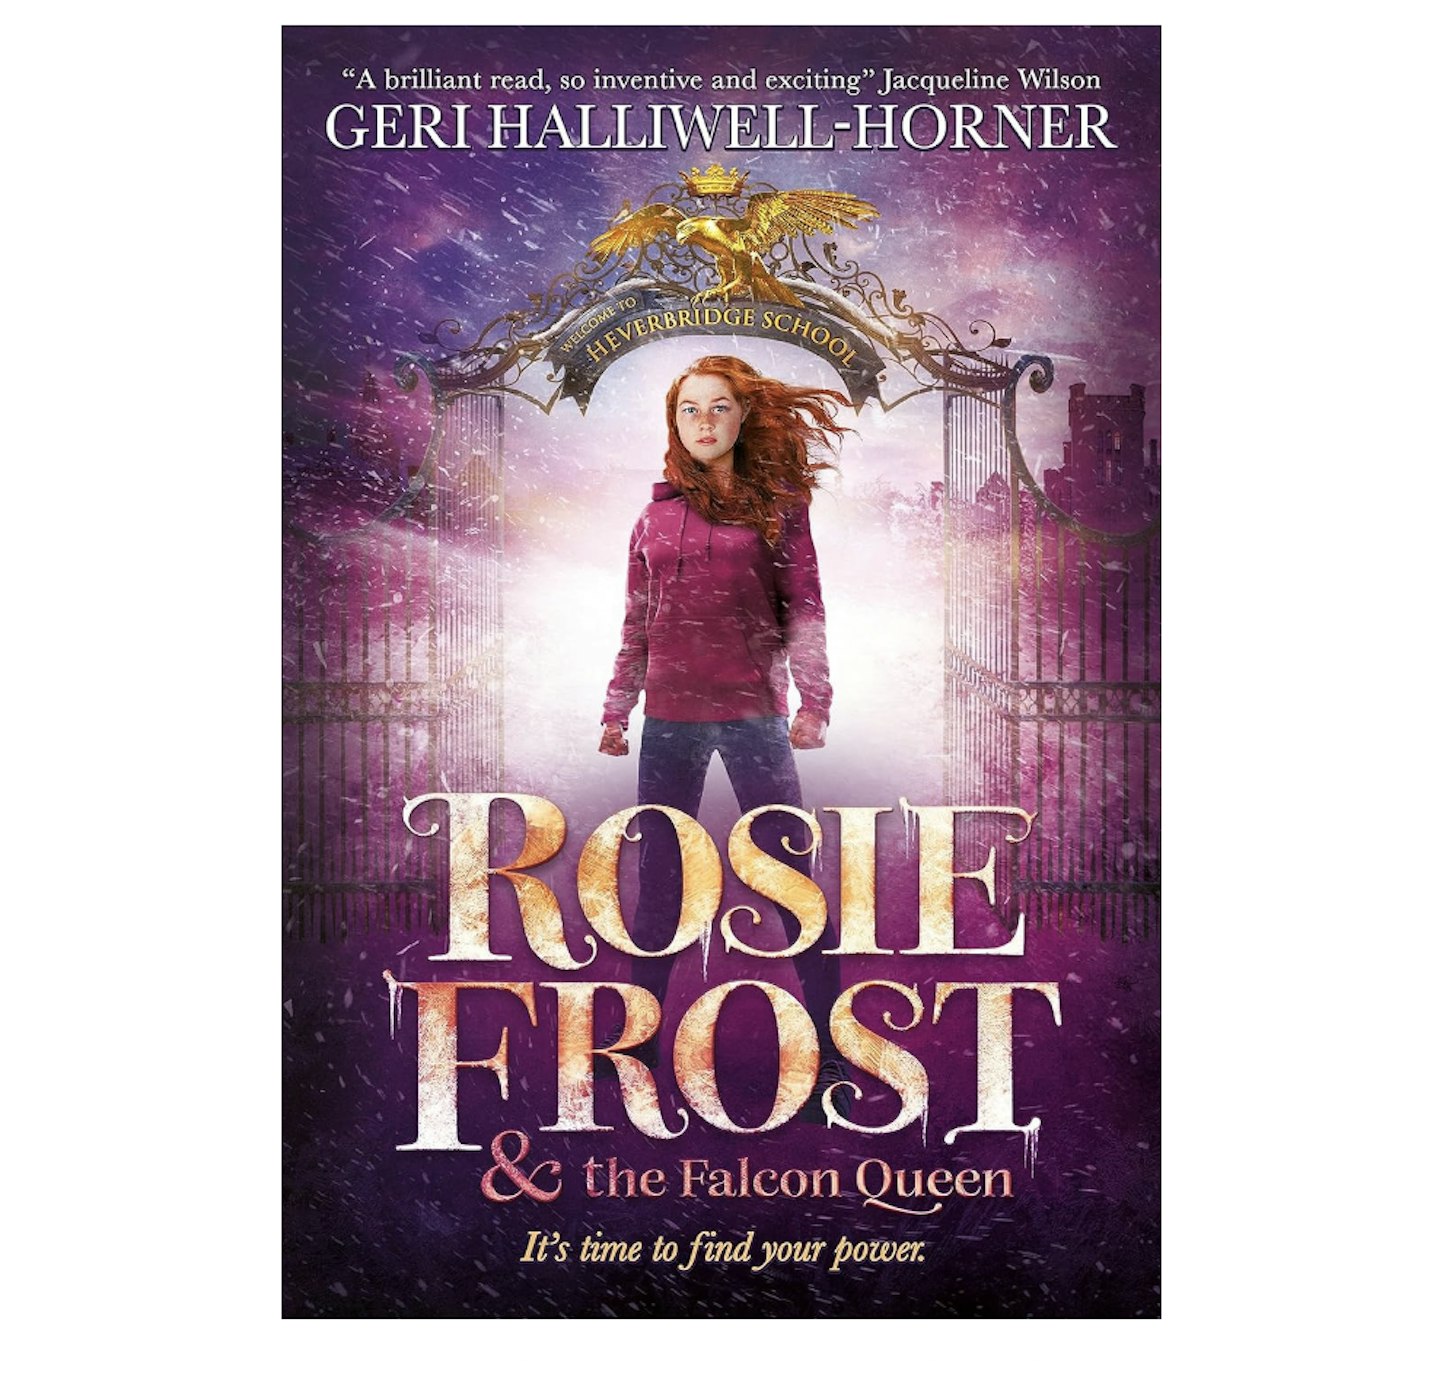 Rosie Frost and the Falcon Queen by Geri Halliwell-Horner